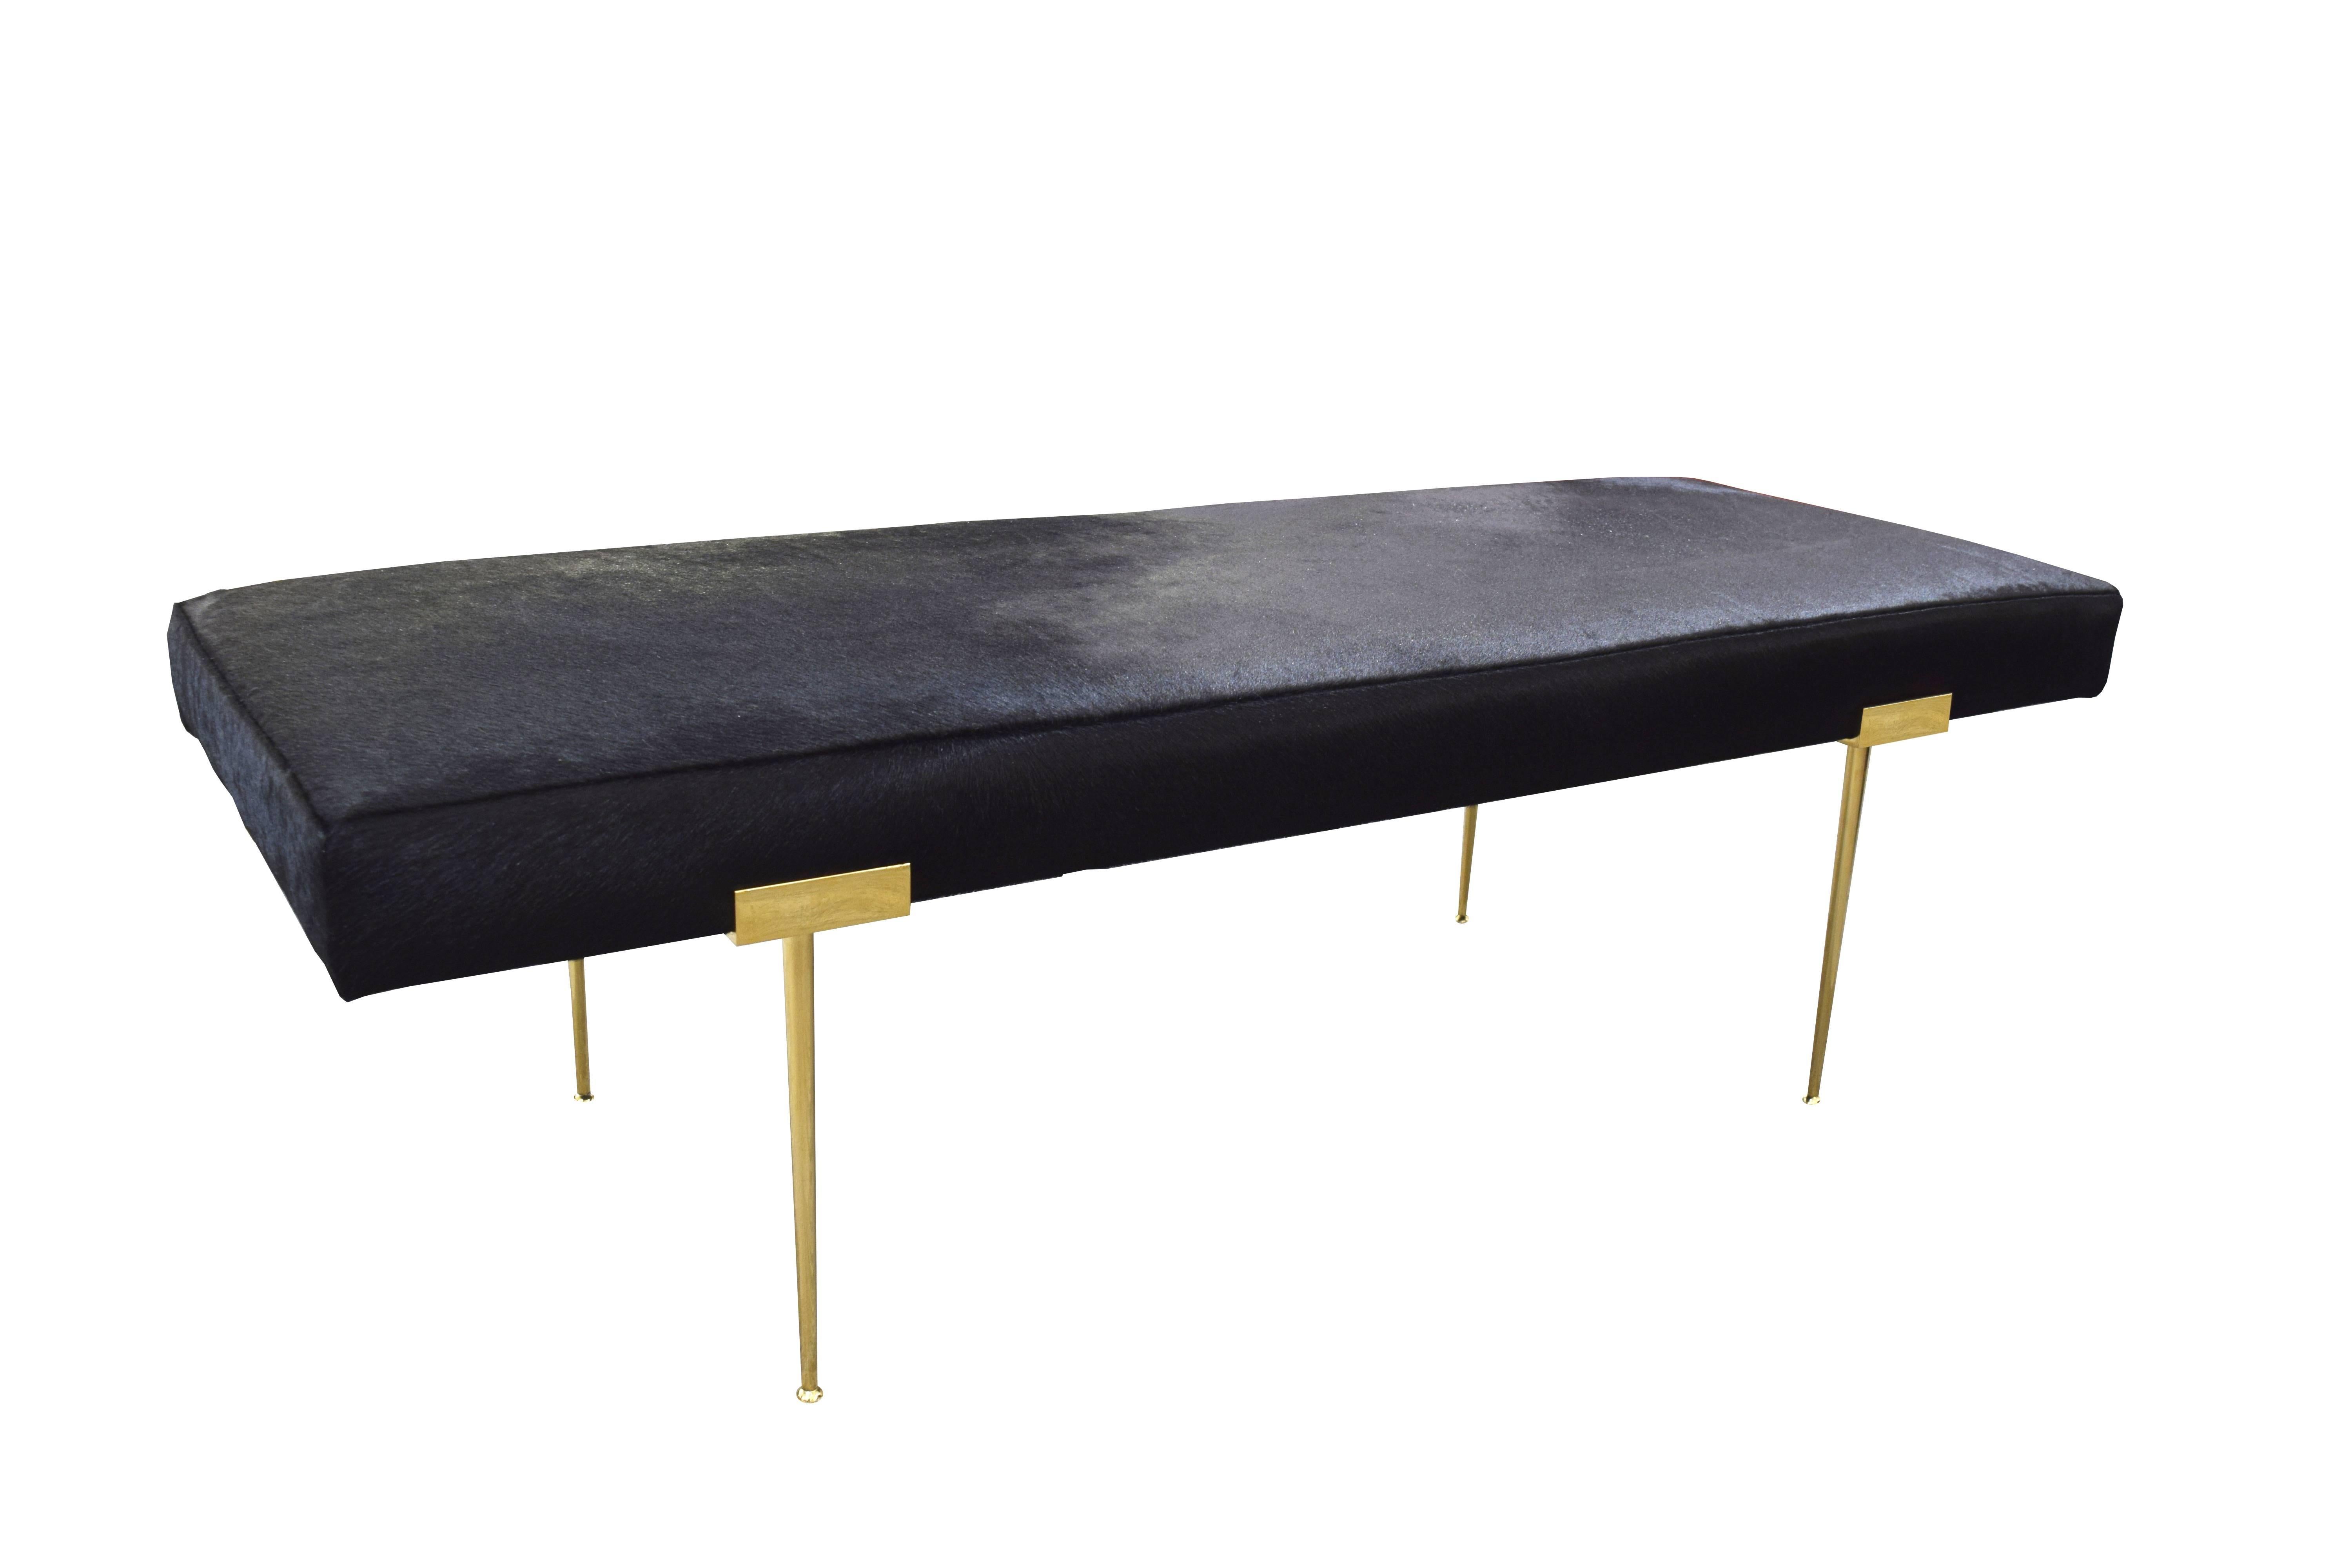 The Madison bench, designed by Irwin Feld Design for CF Modern, is a seat for those looking to jazz space up with style. Inspired by the urban appeal of Madison Avenue, the four Madison legs are made from hand polished brass and bring a chic glamour